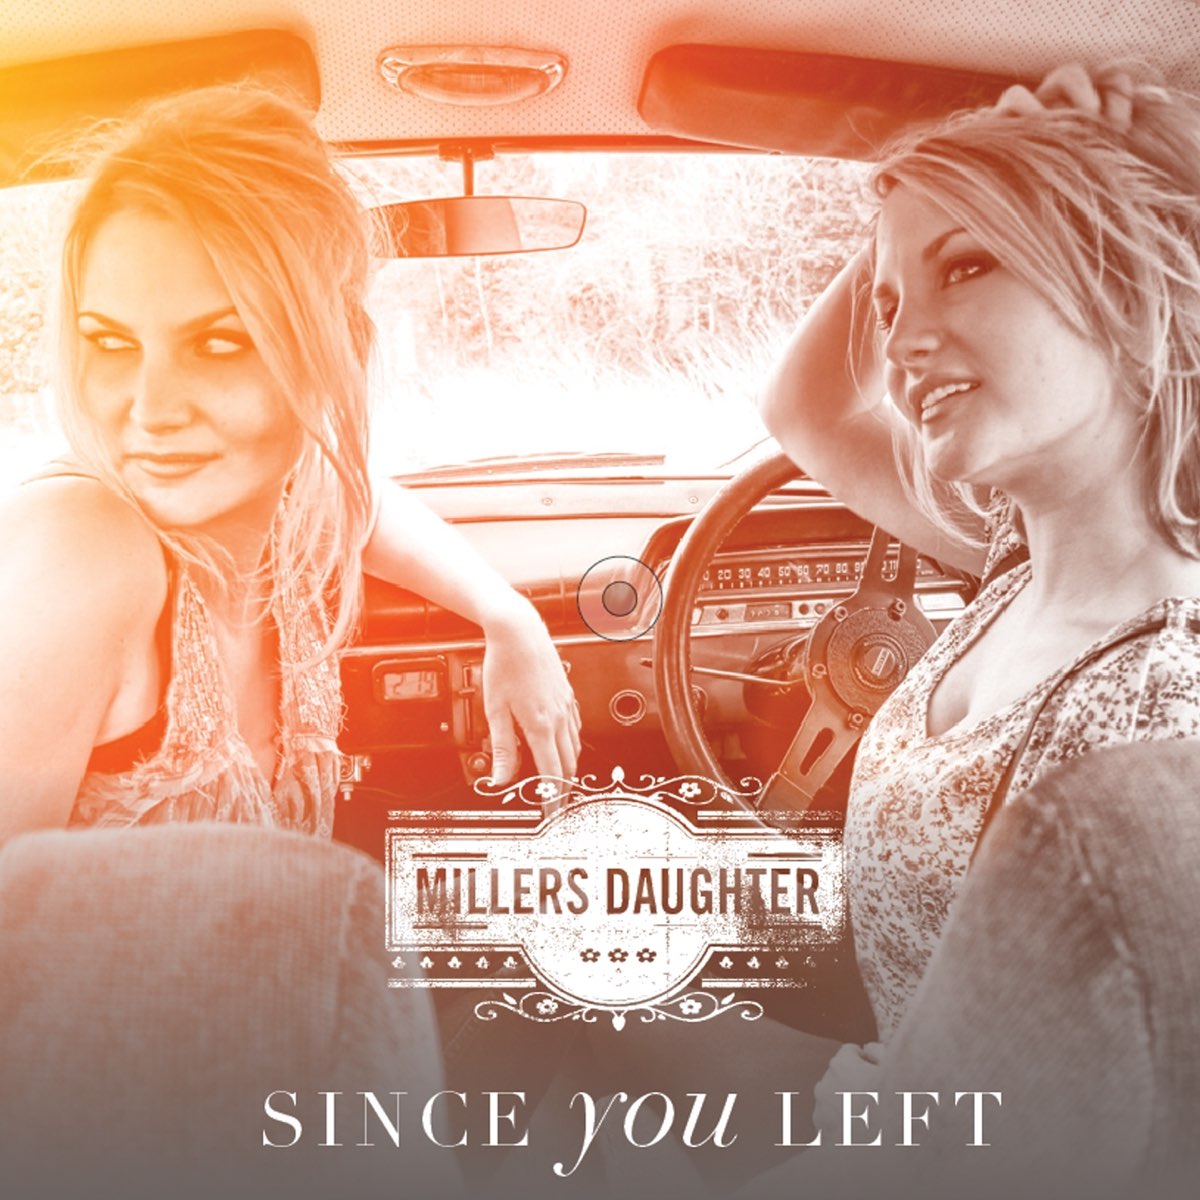 Daughter music. Daughter of the Miller. Daughter - 2013 - if you leave. Daughter albums 2013 if you leave. Since i left you фото из клипа.